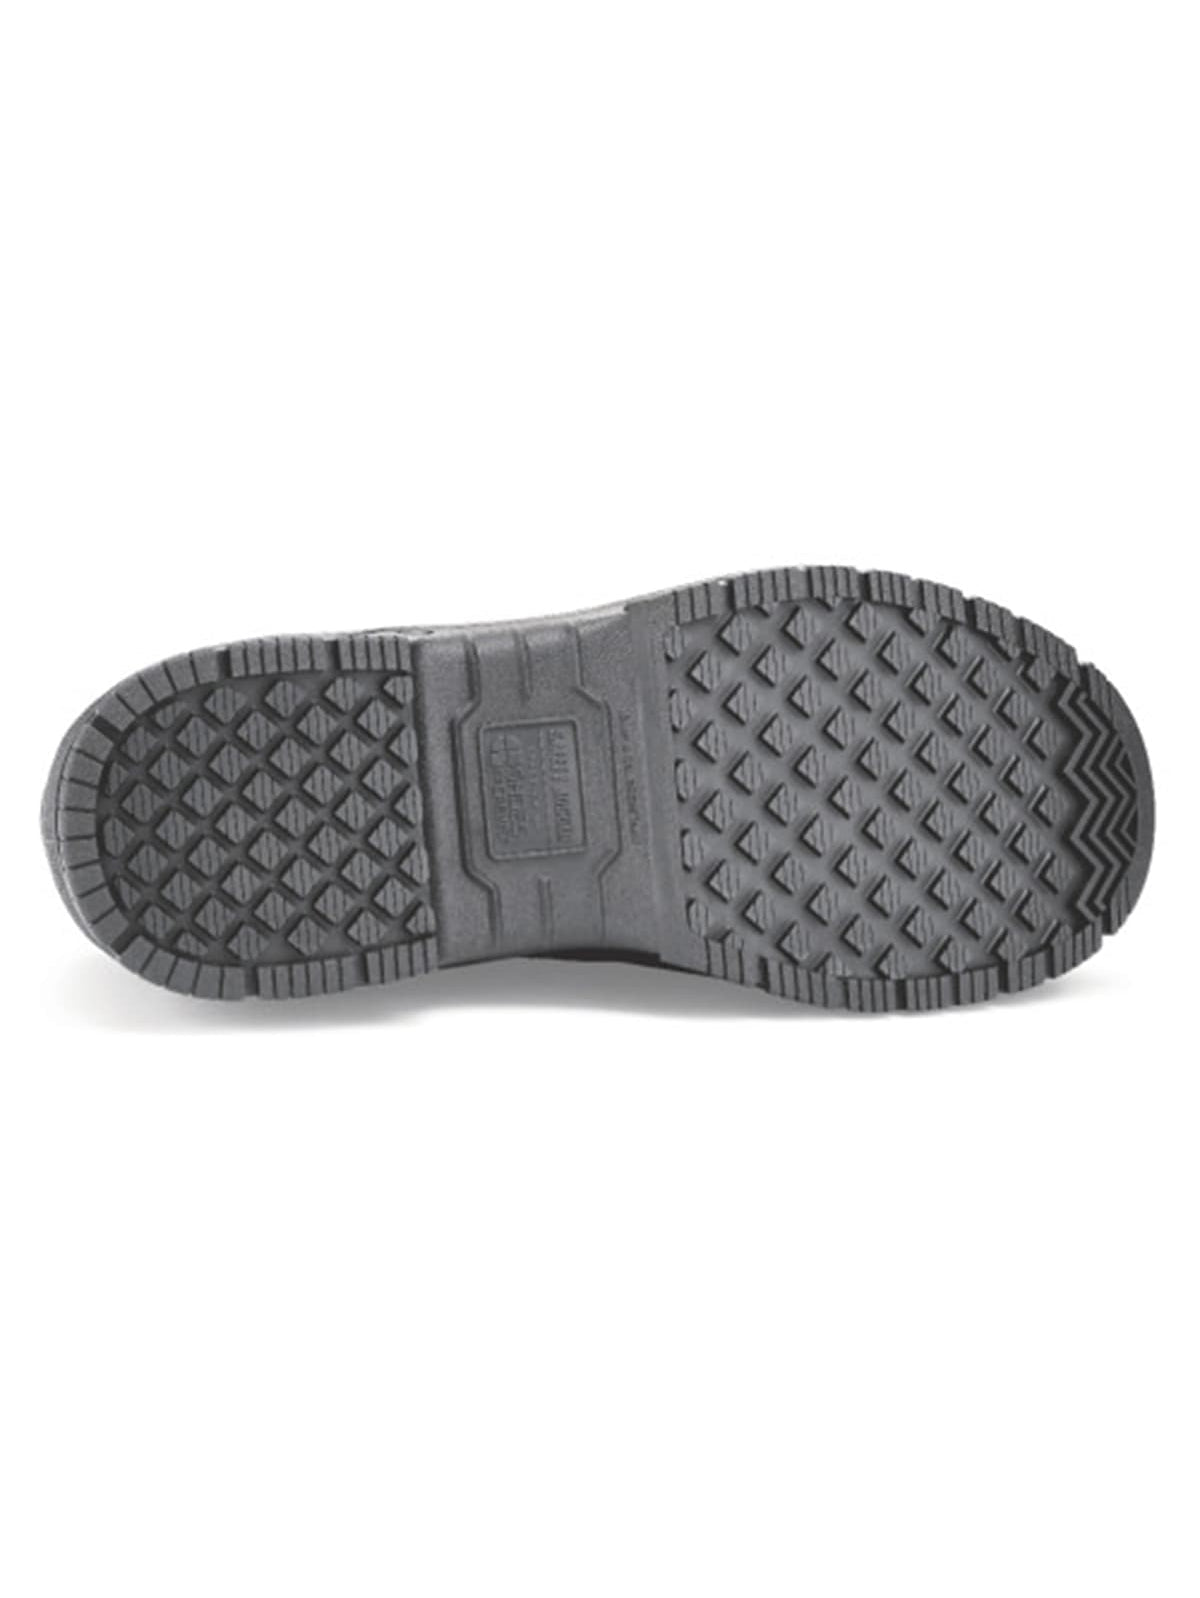 Unisex Safety Shoe X111081 (S3) by  Shoes For Crews.